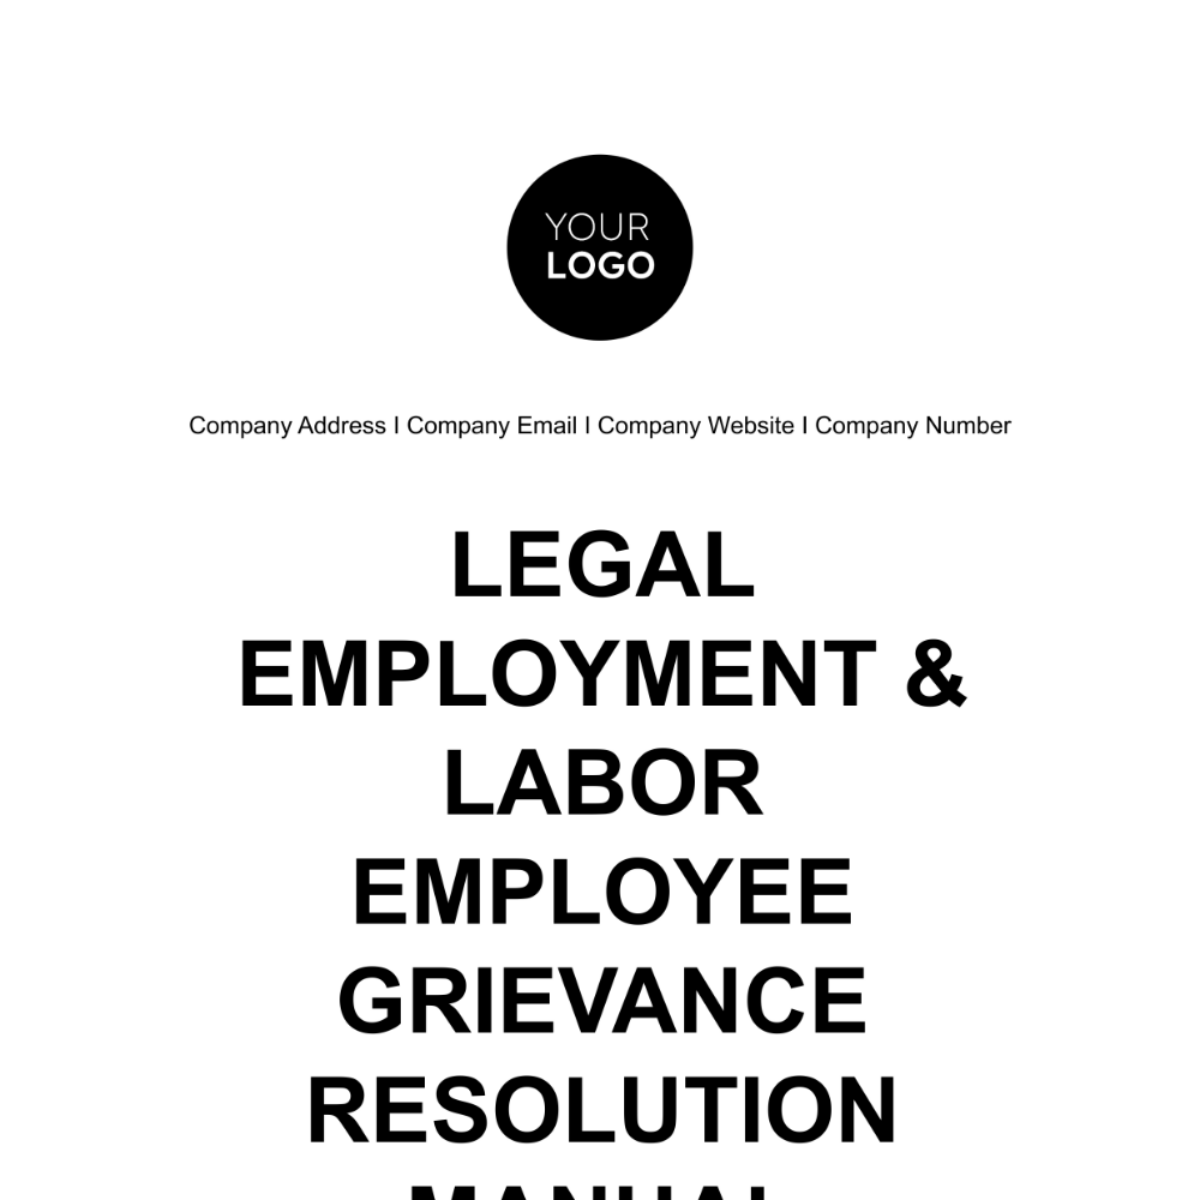 Legal Employment & Labor Employee Grievance Resolution Manual Template